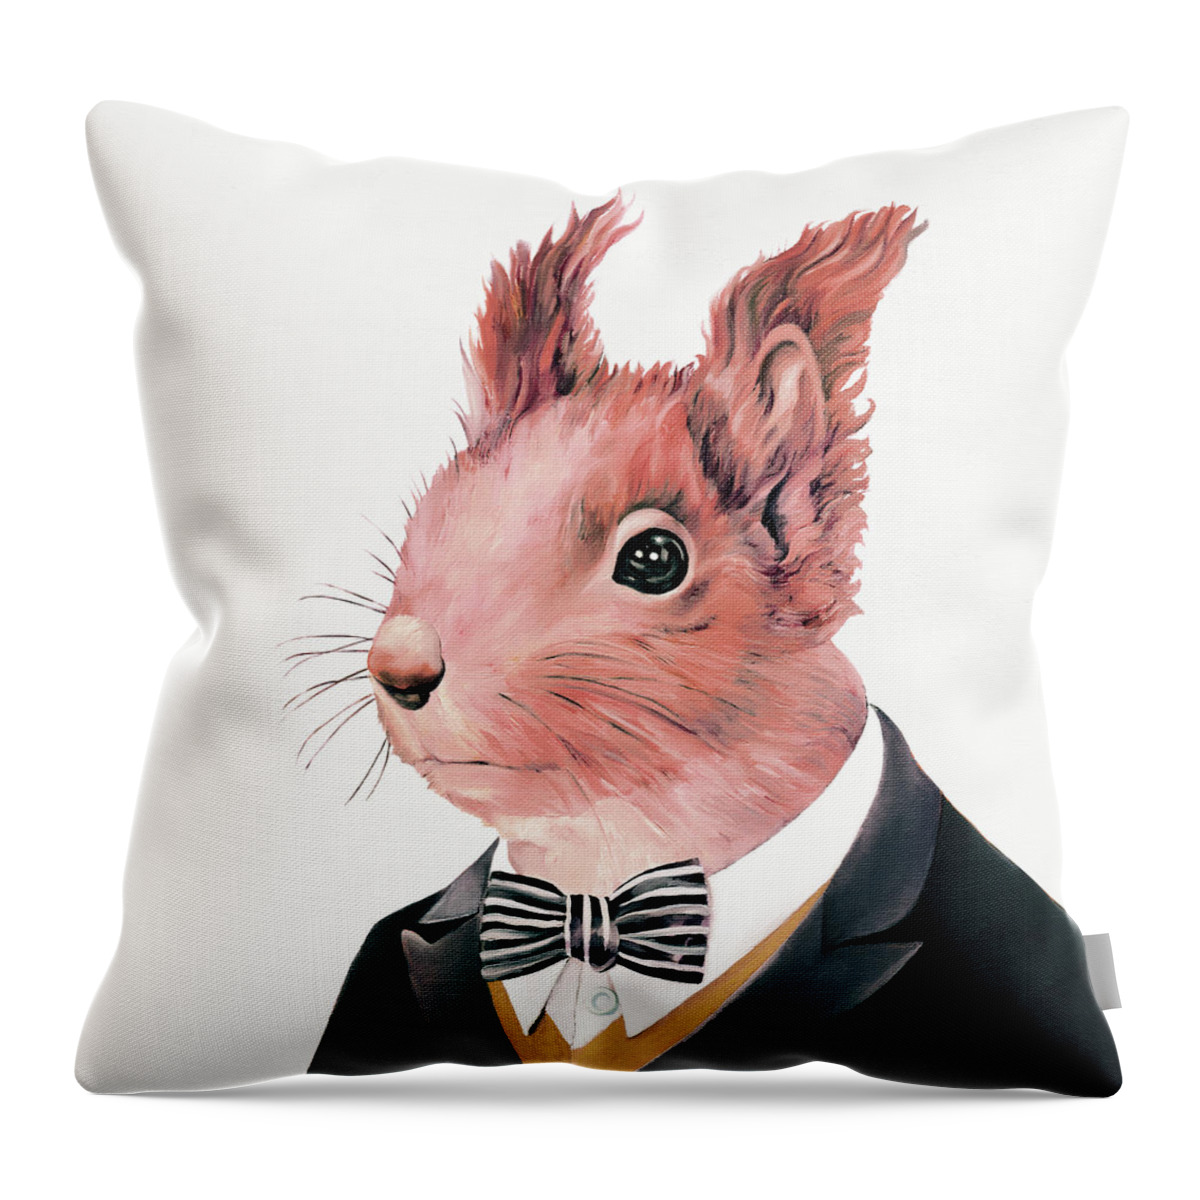 Squirrel Throw Pillow featuring the painting Red Squirrel by Animal Crew